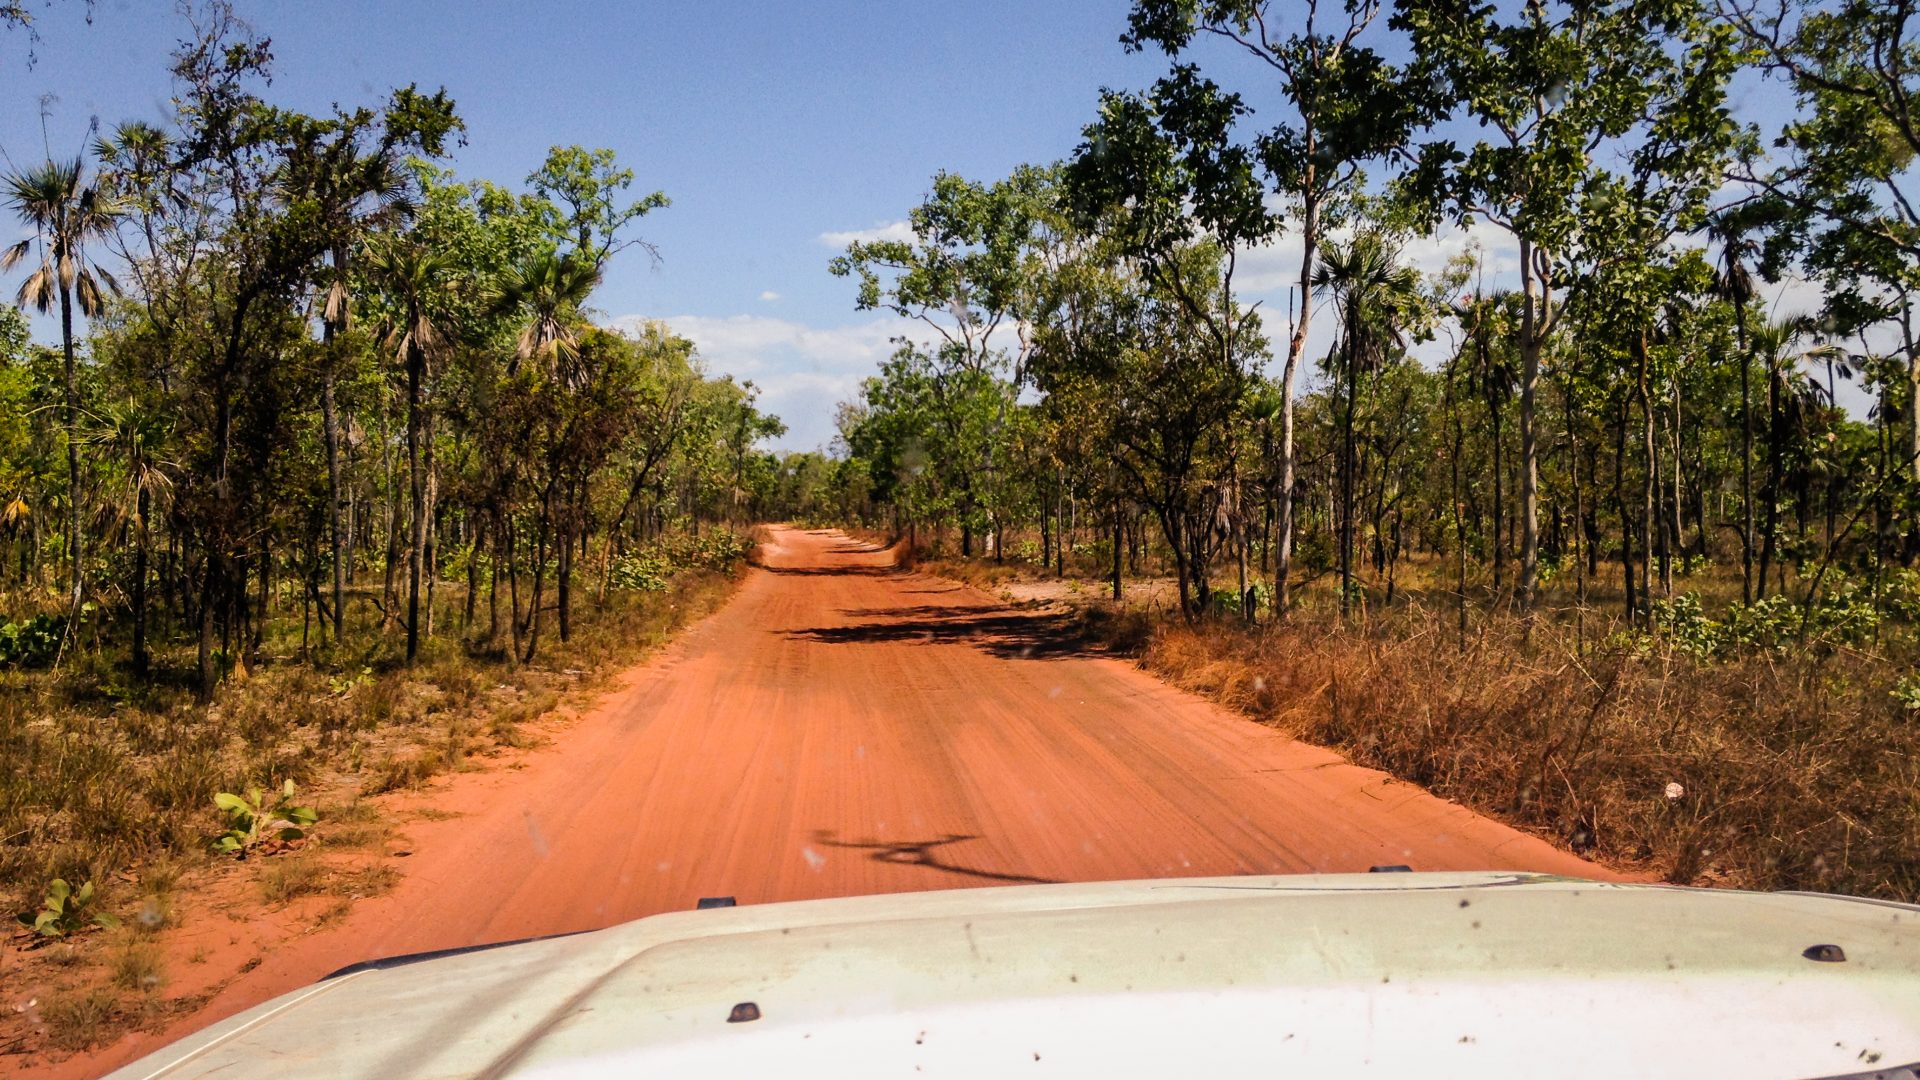 A jeep drives along a red road in the Australian Outback.